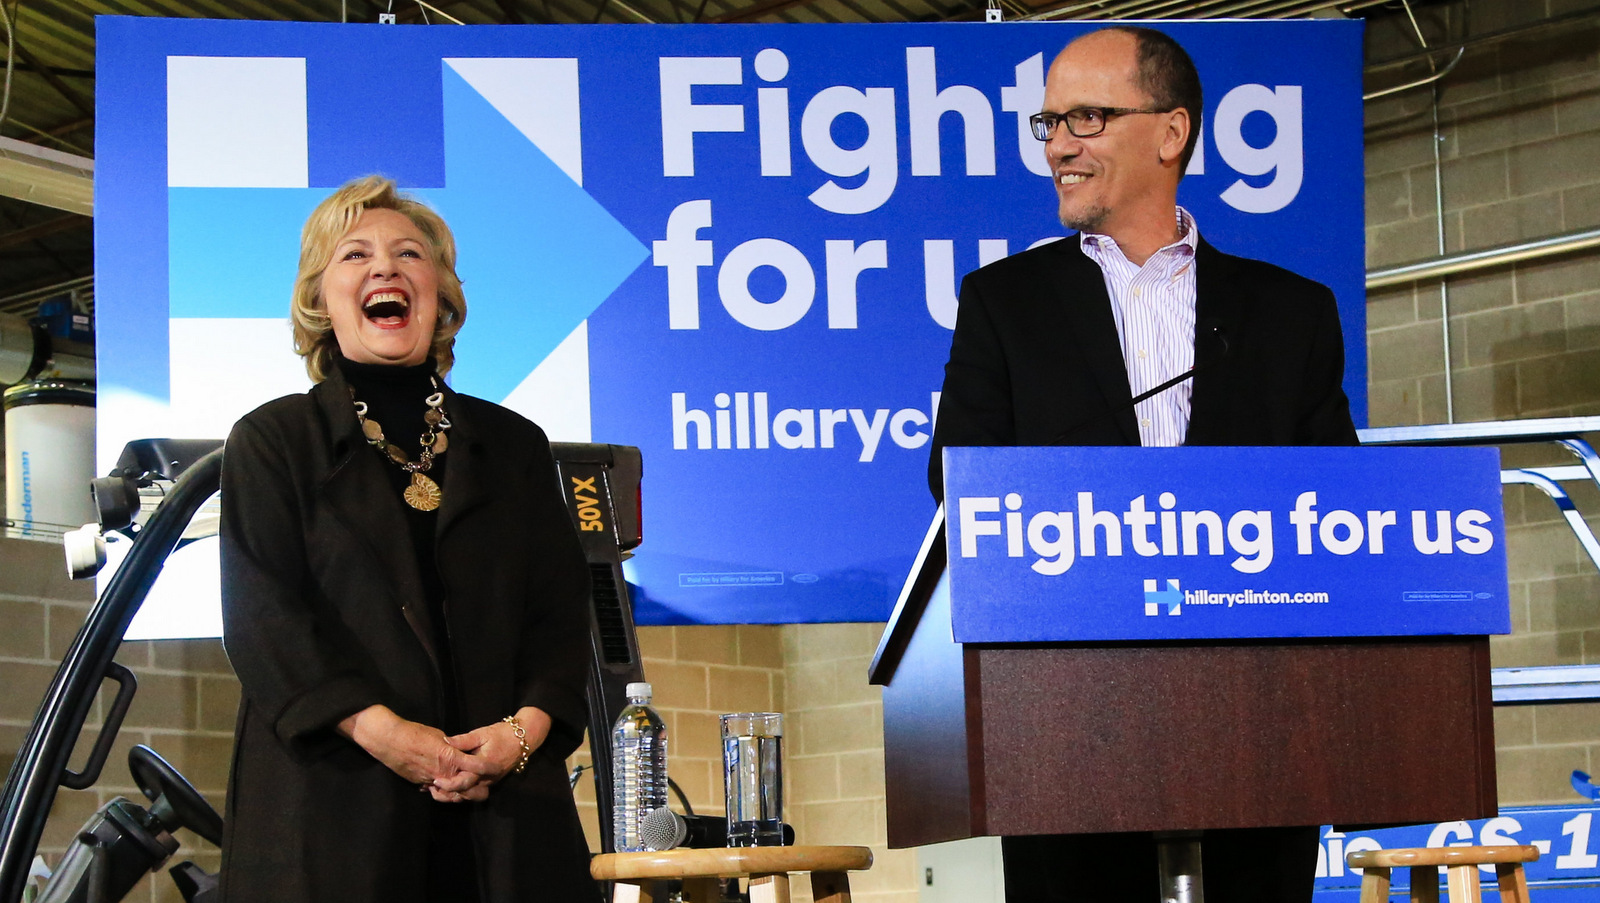 Hillary Clinton laughs as Tom Perez endorses her during a campaign stop in Sioux City, Iowa, Dec. 4, 2015. (AP/Nati Harnik)